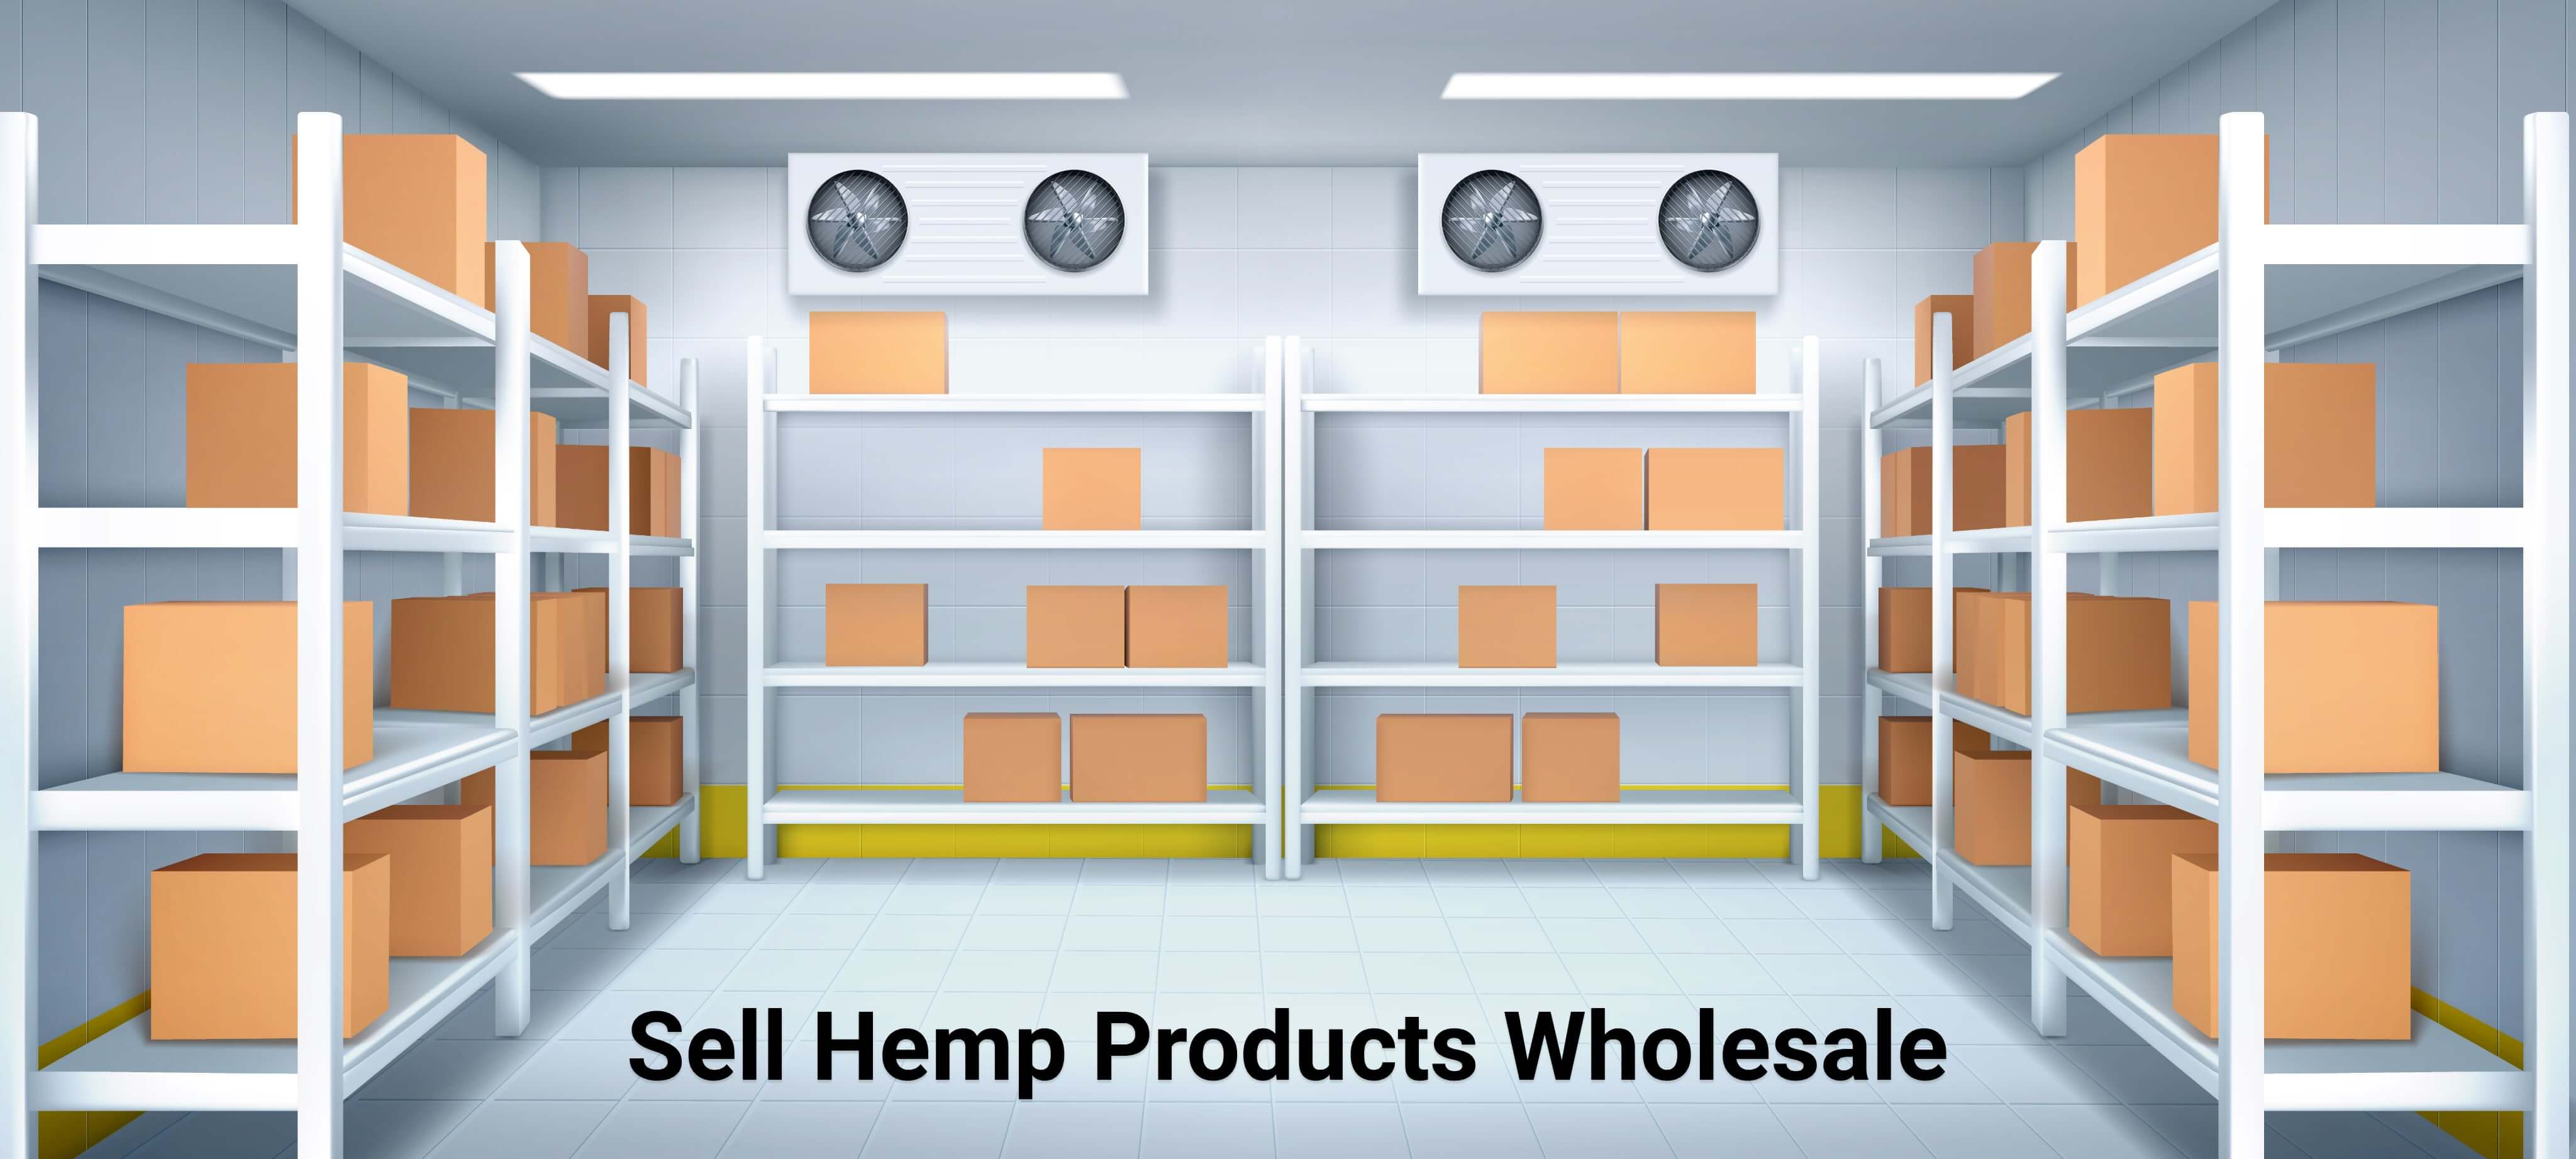 Sell Hemp Products Wholesale